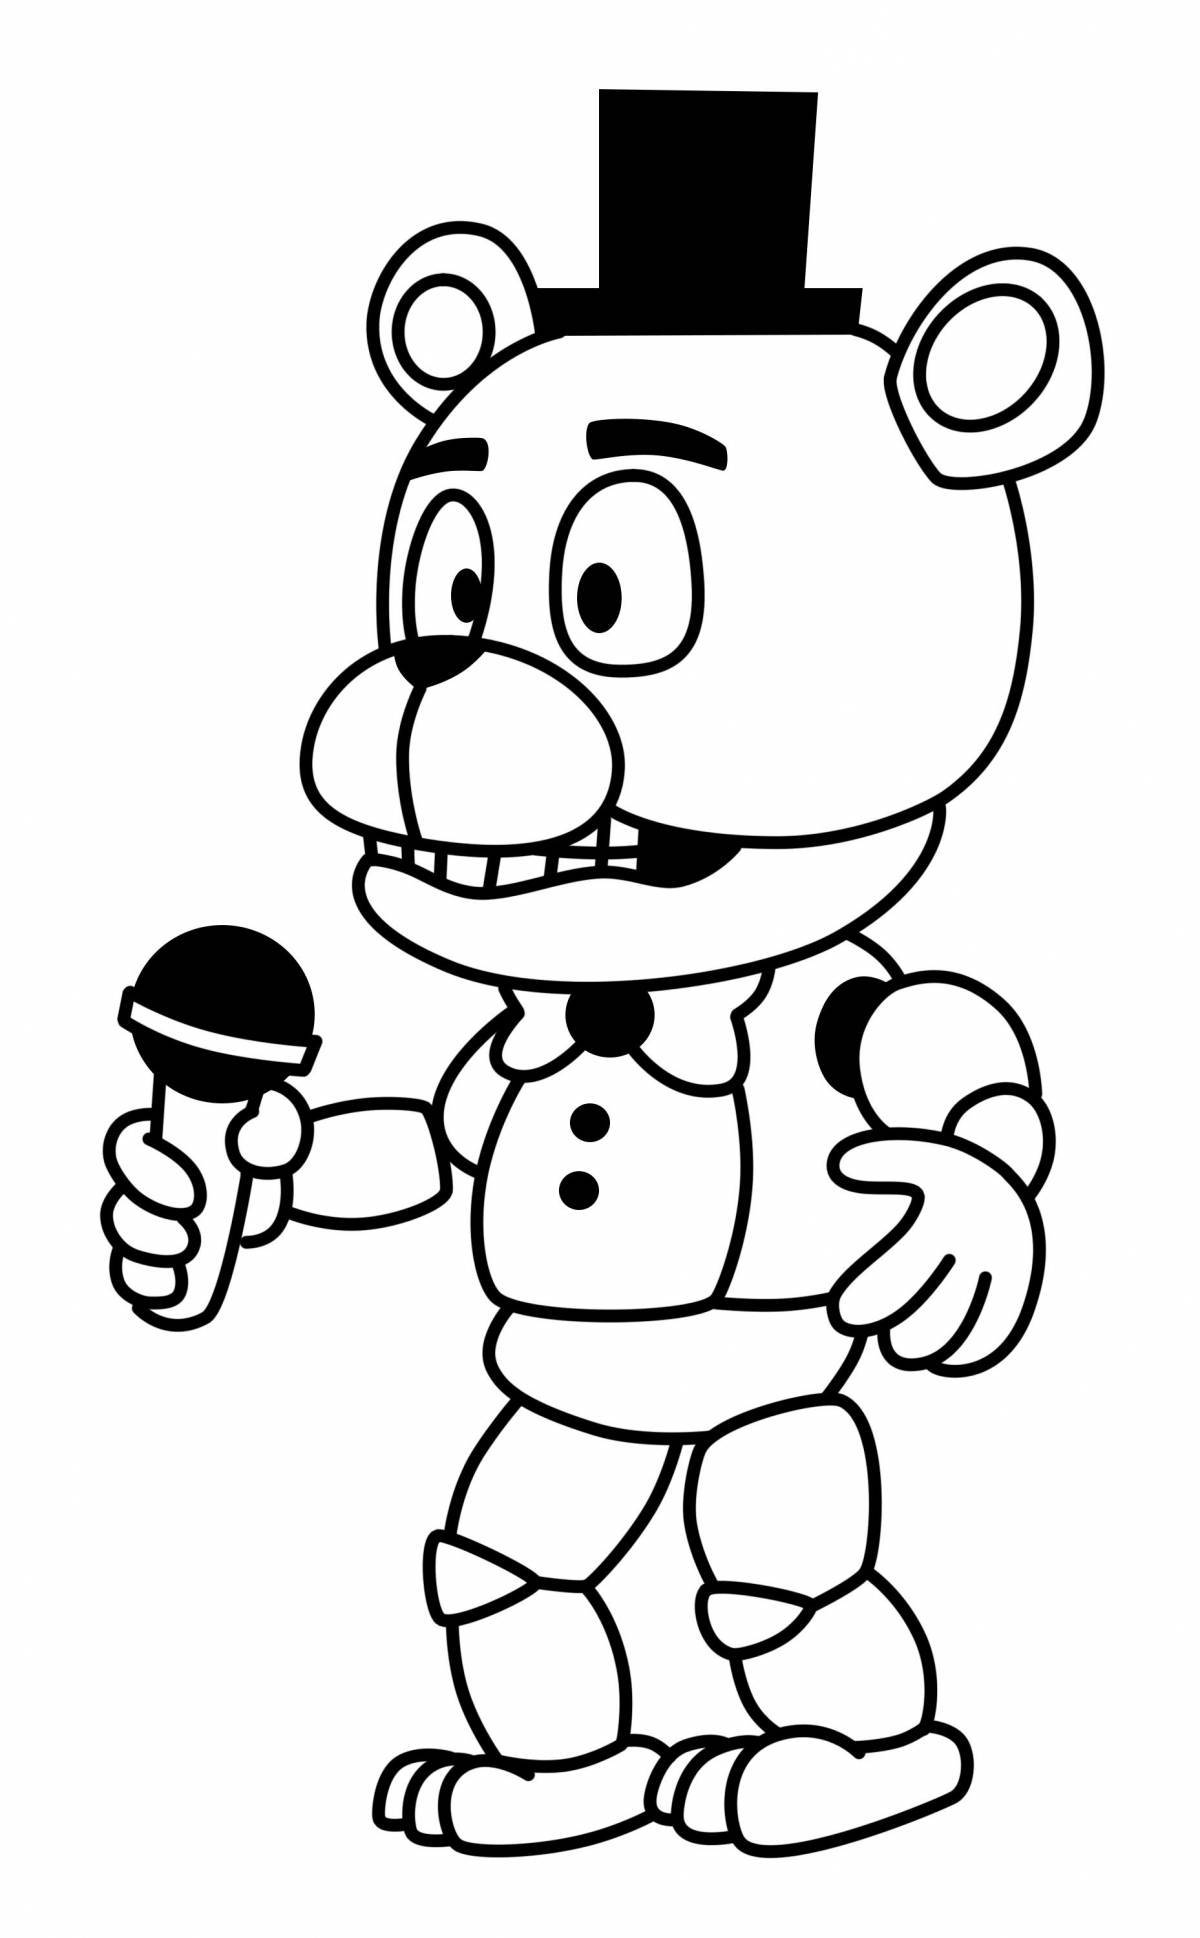 Funny animatronics coloring for kids